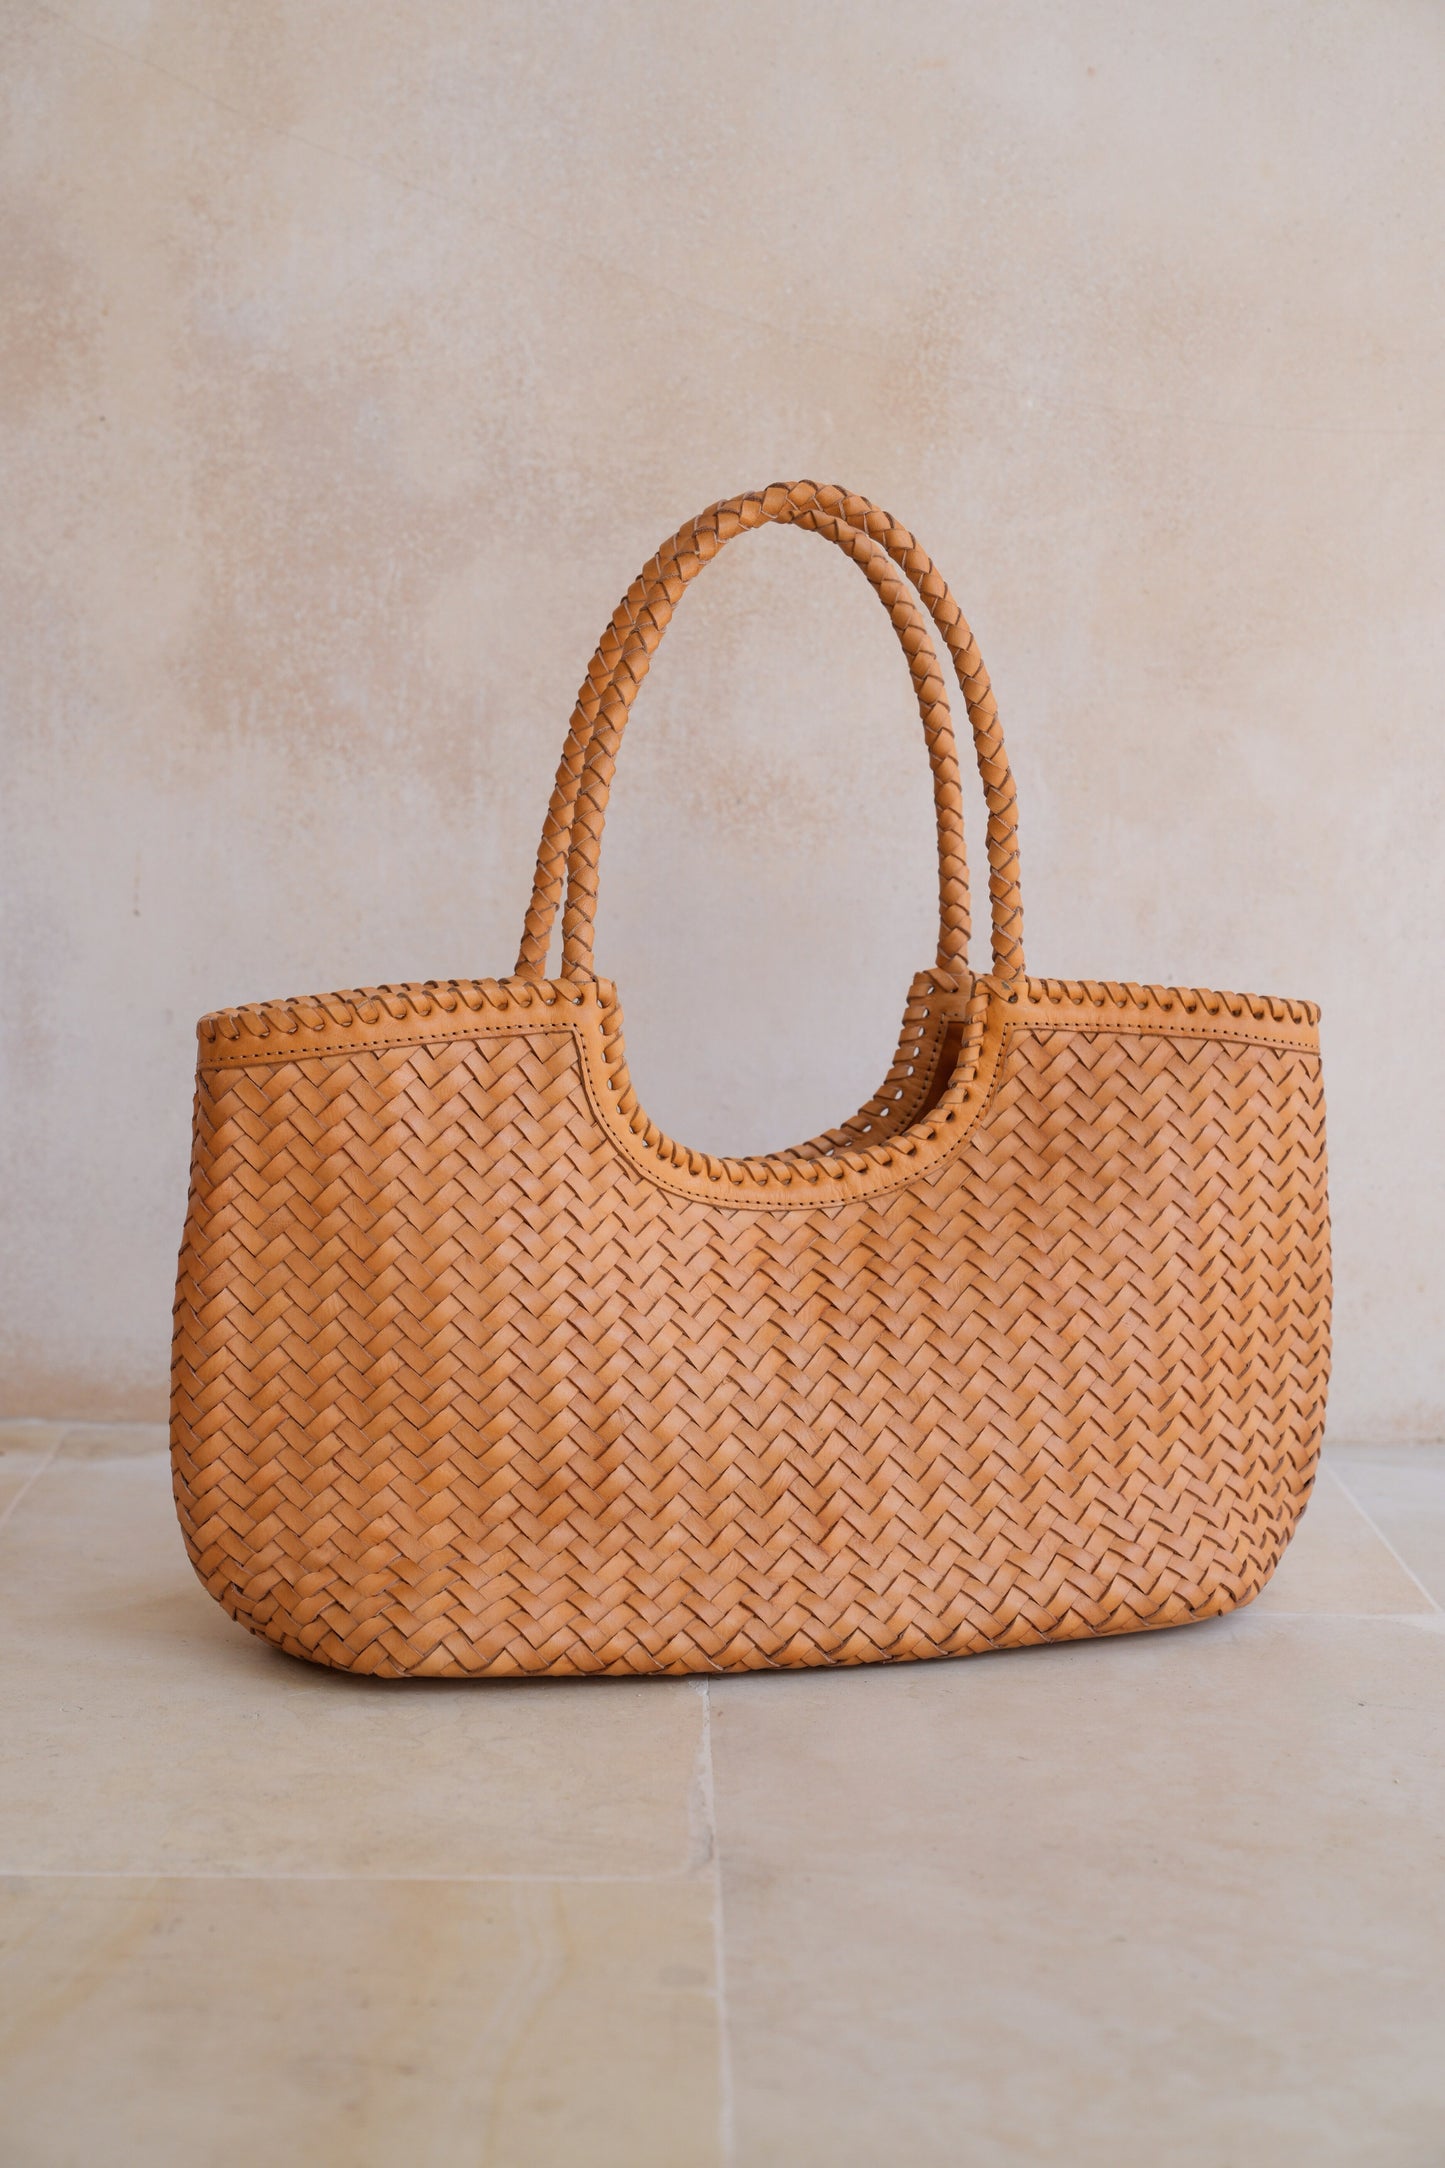 Jolene Handwoven Leather Tote in Tan